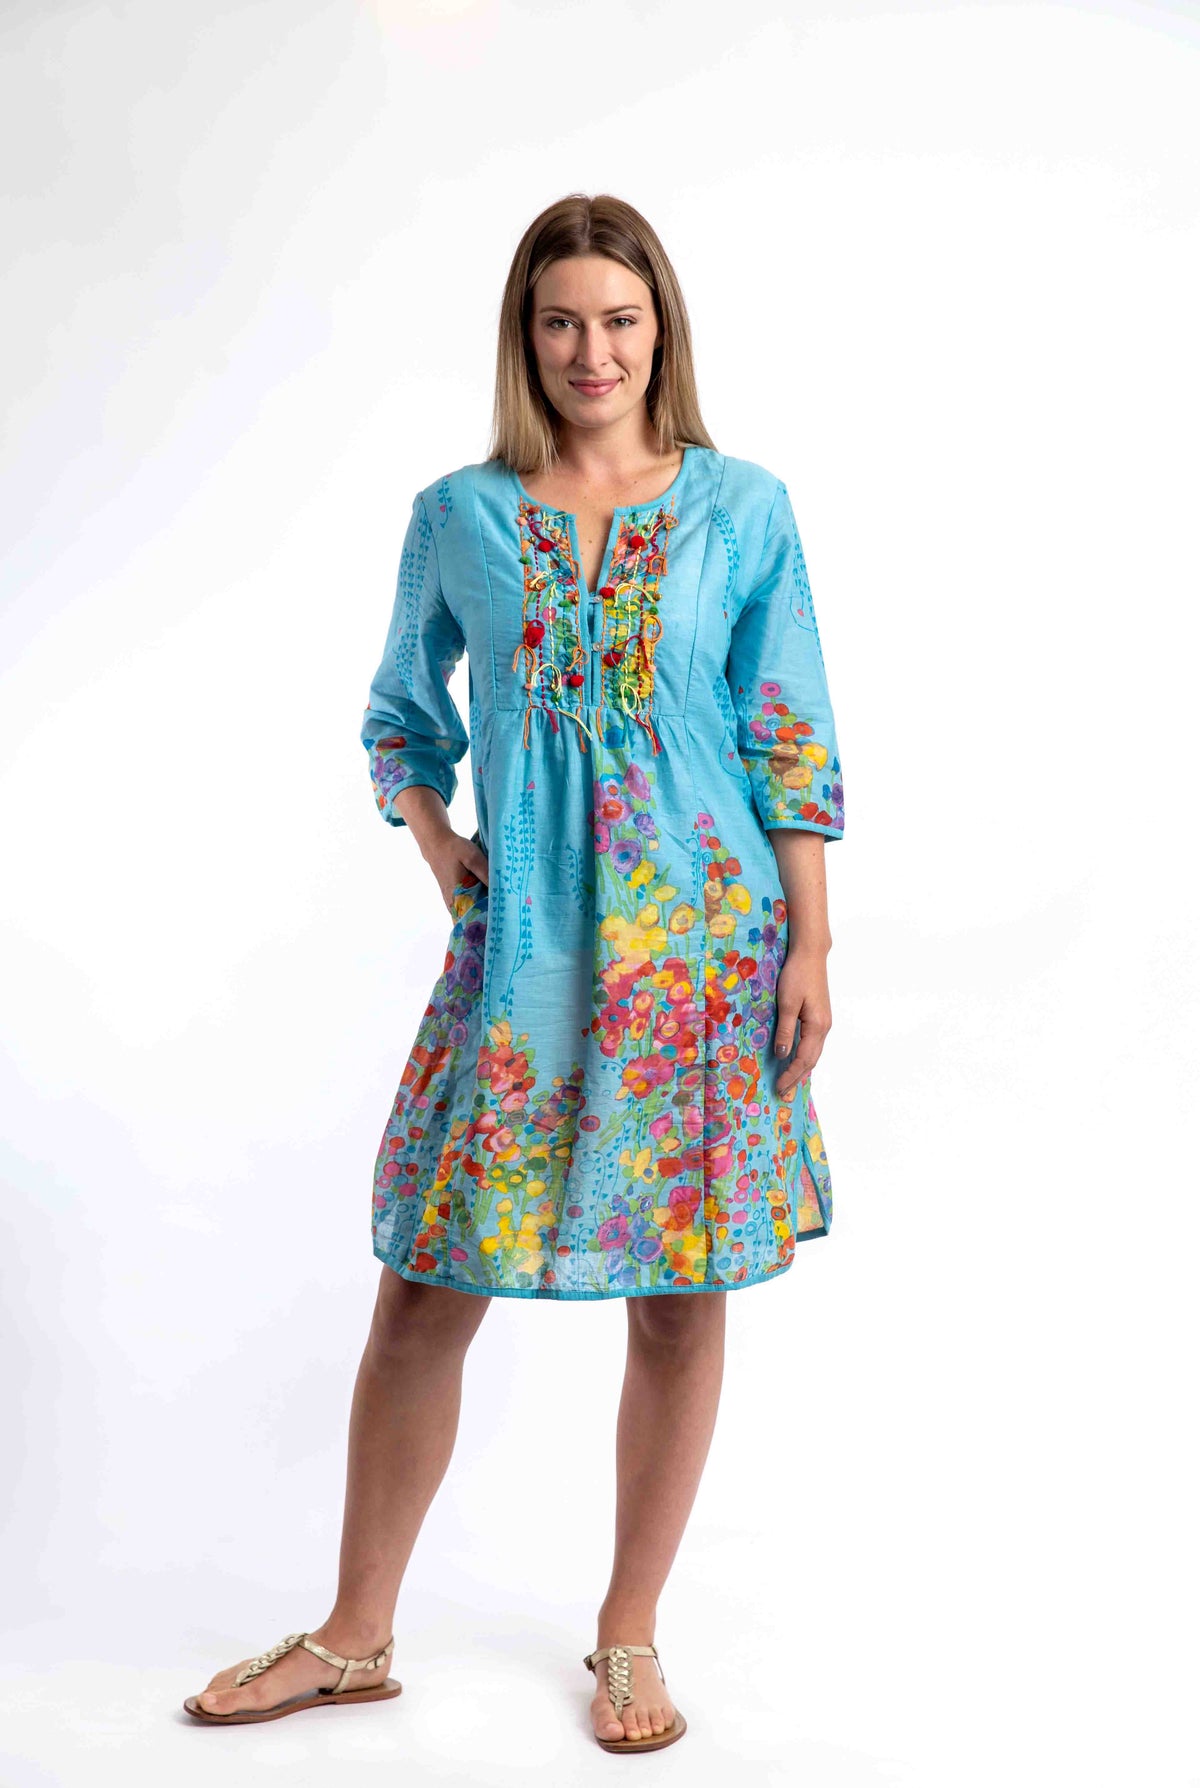 Bangalow Boho Dress in Midday Blue